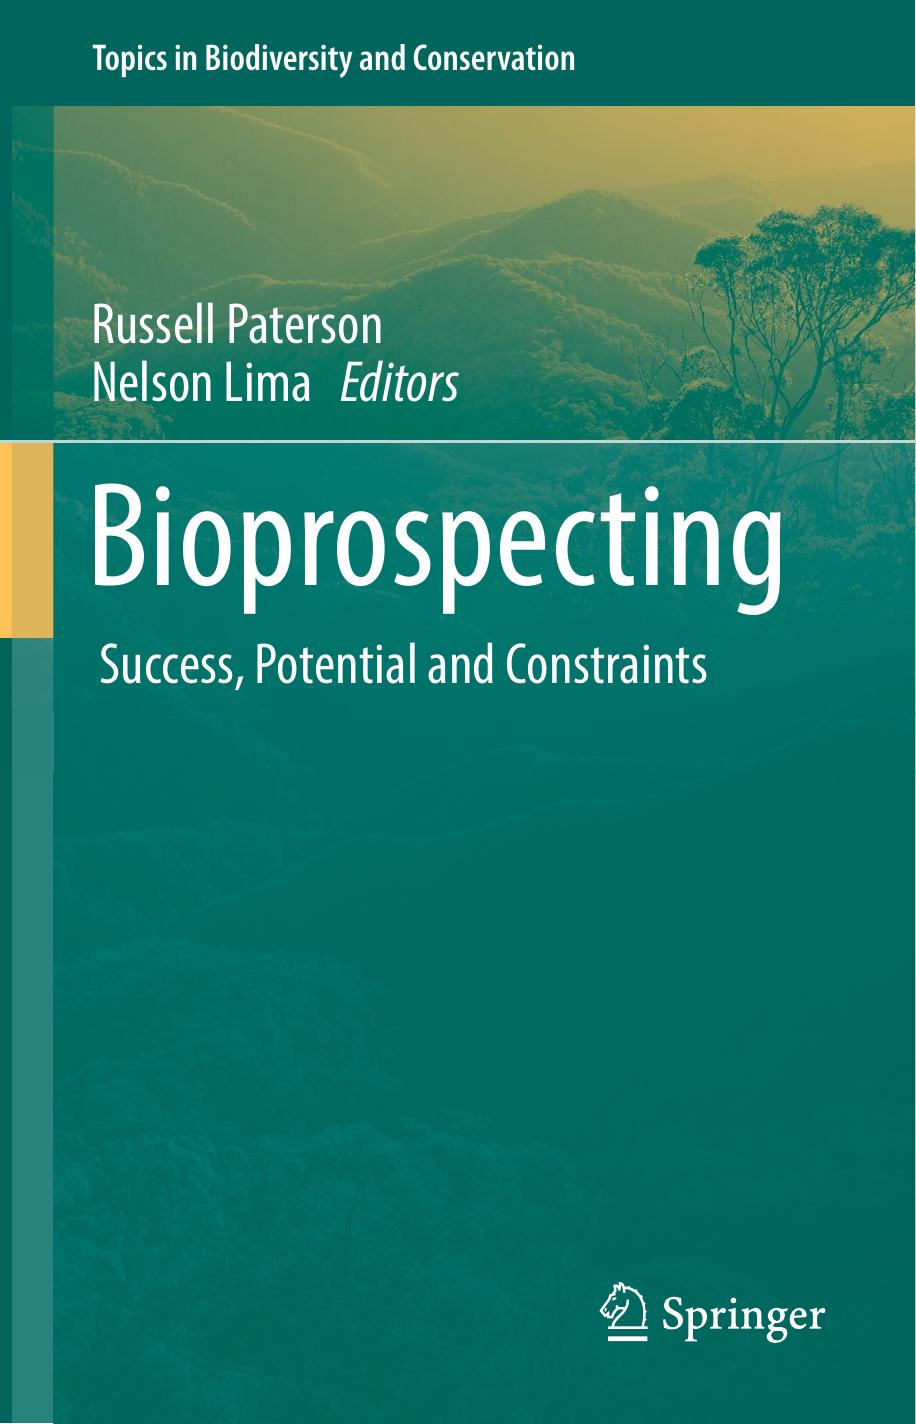 Bioprospecting Success, Potential and Constraints 2017